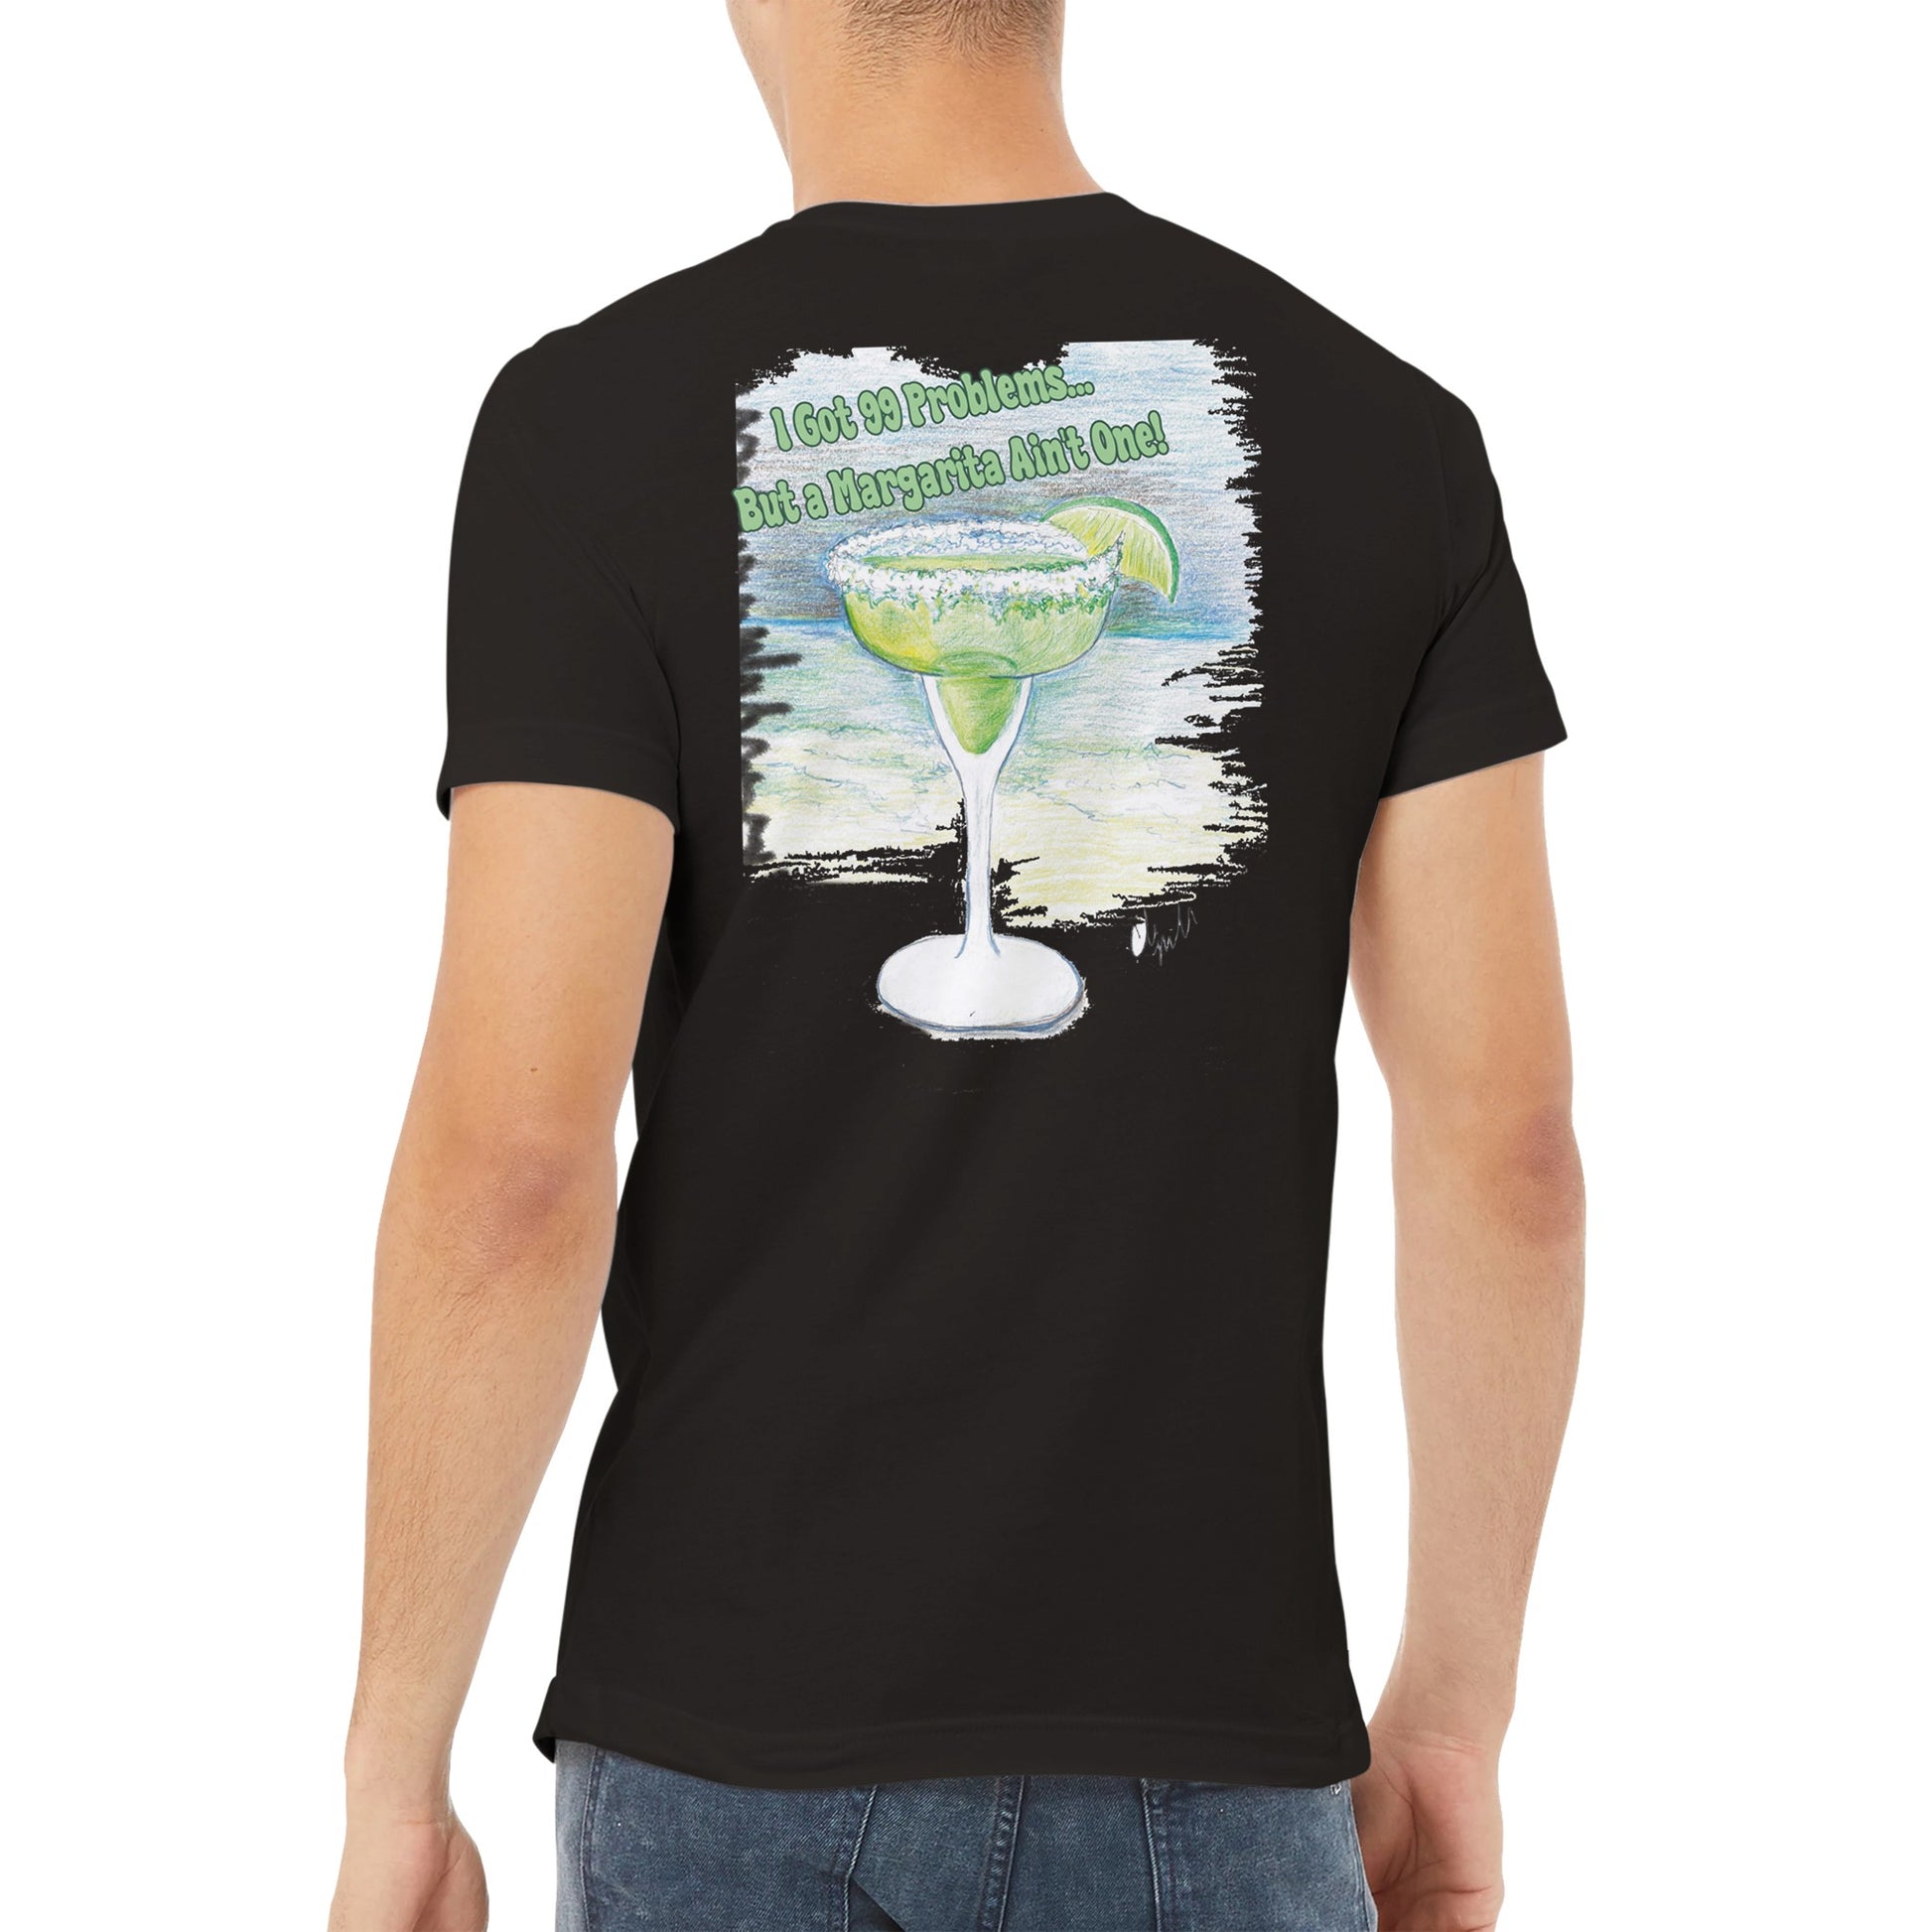 A black premium unisex v-neck t-shirt with original artwork and motto I Got 99 Problems But a Margarita Aint One on back and WhatYa Say logo on front made with combed and ring-spun cotton from WhatYa Say Apparel worn by A brown-haired male back view.